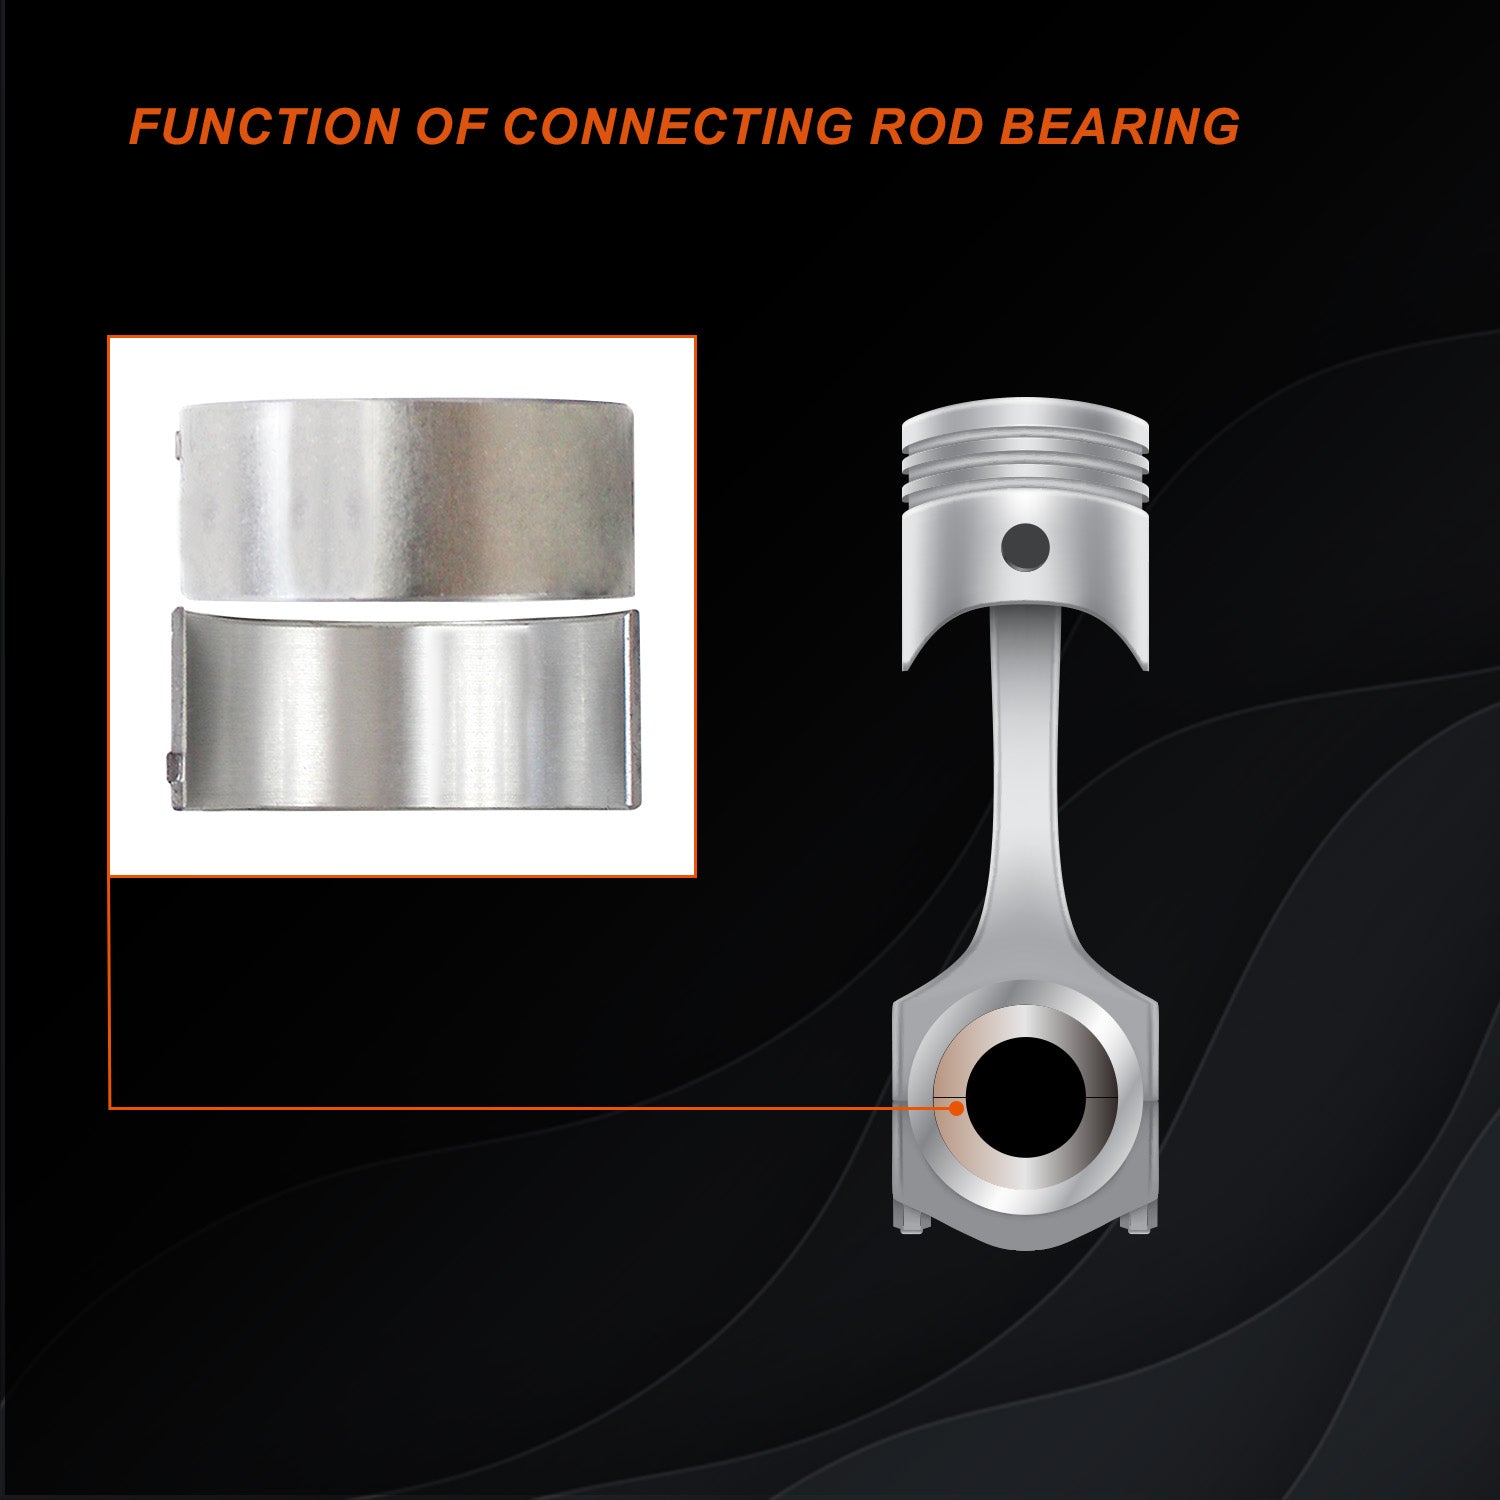 Function of Connecting Rod Bearing